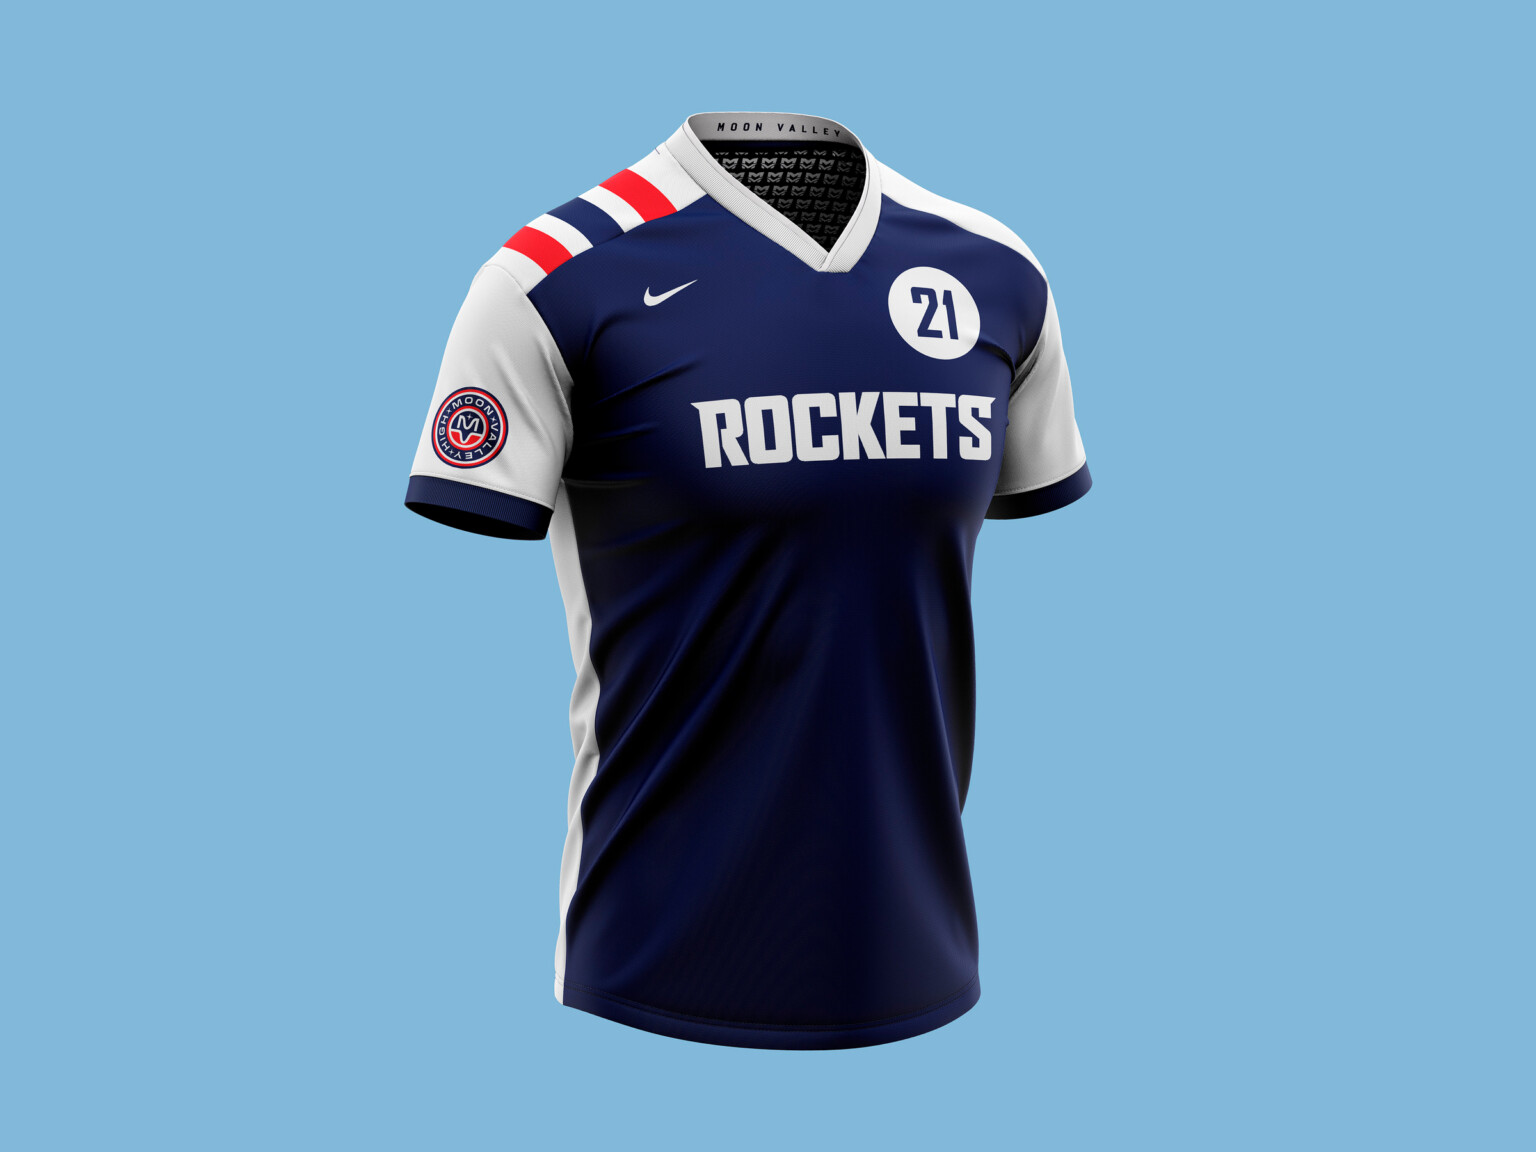 Blue jersey tshirt with white and red accents, Rockets written across front